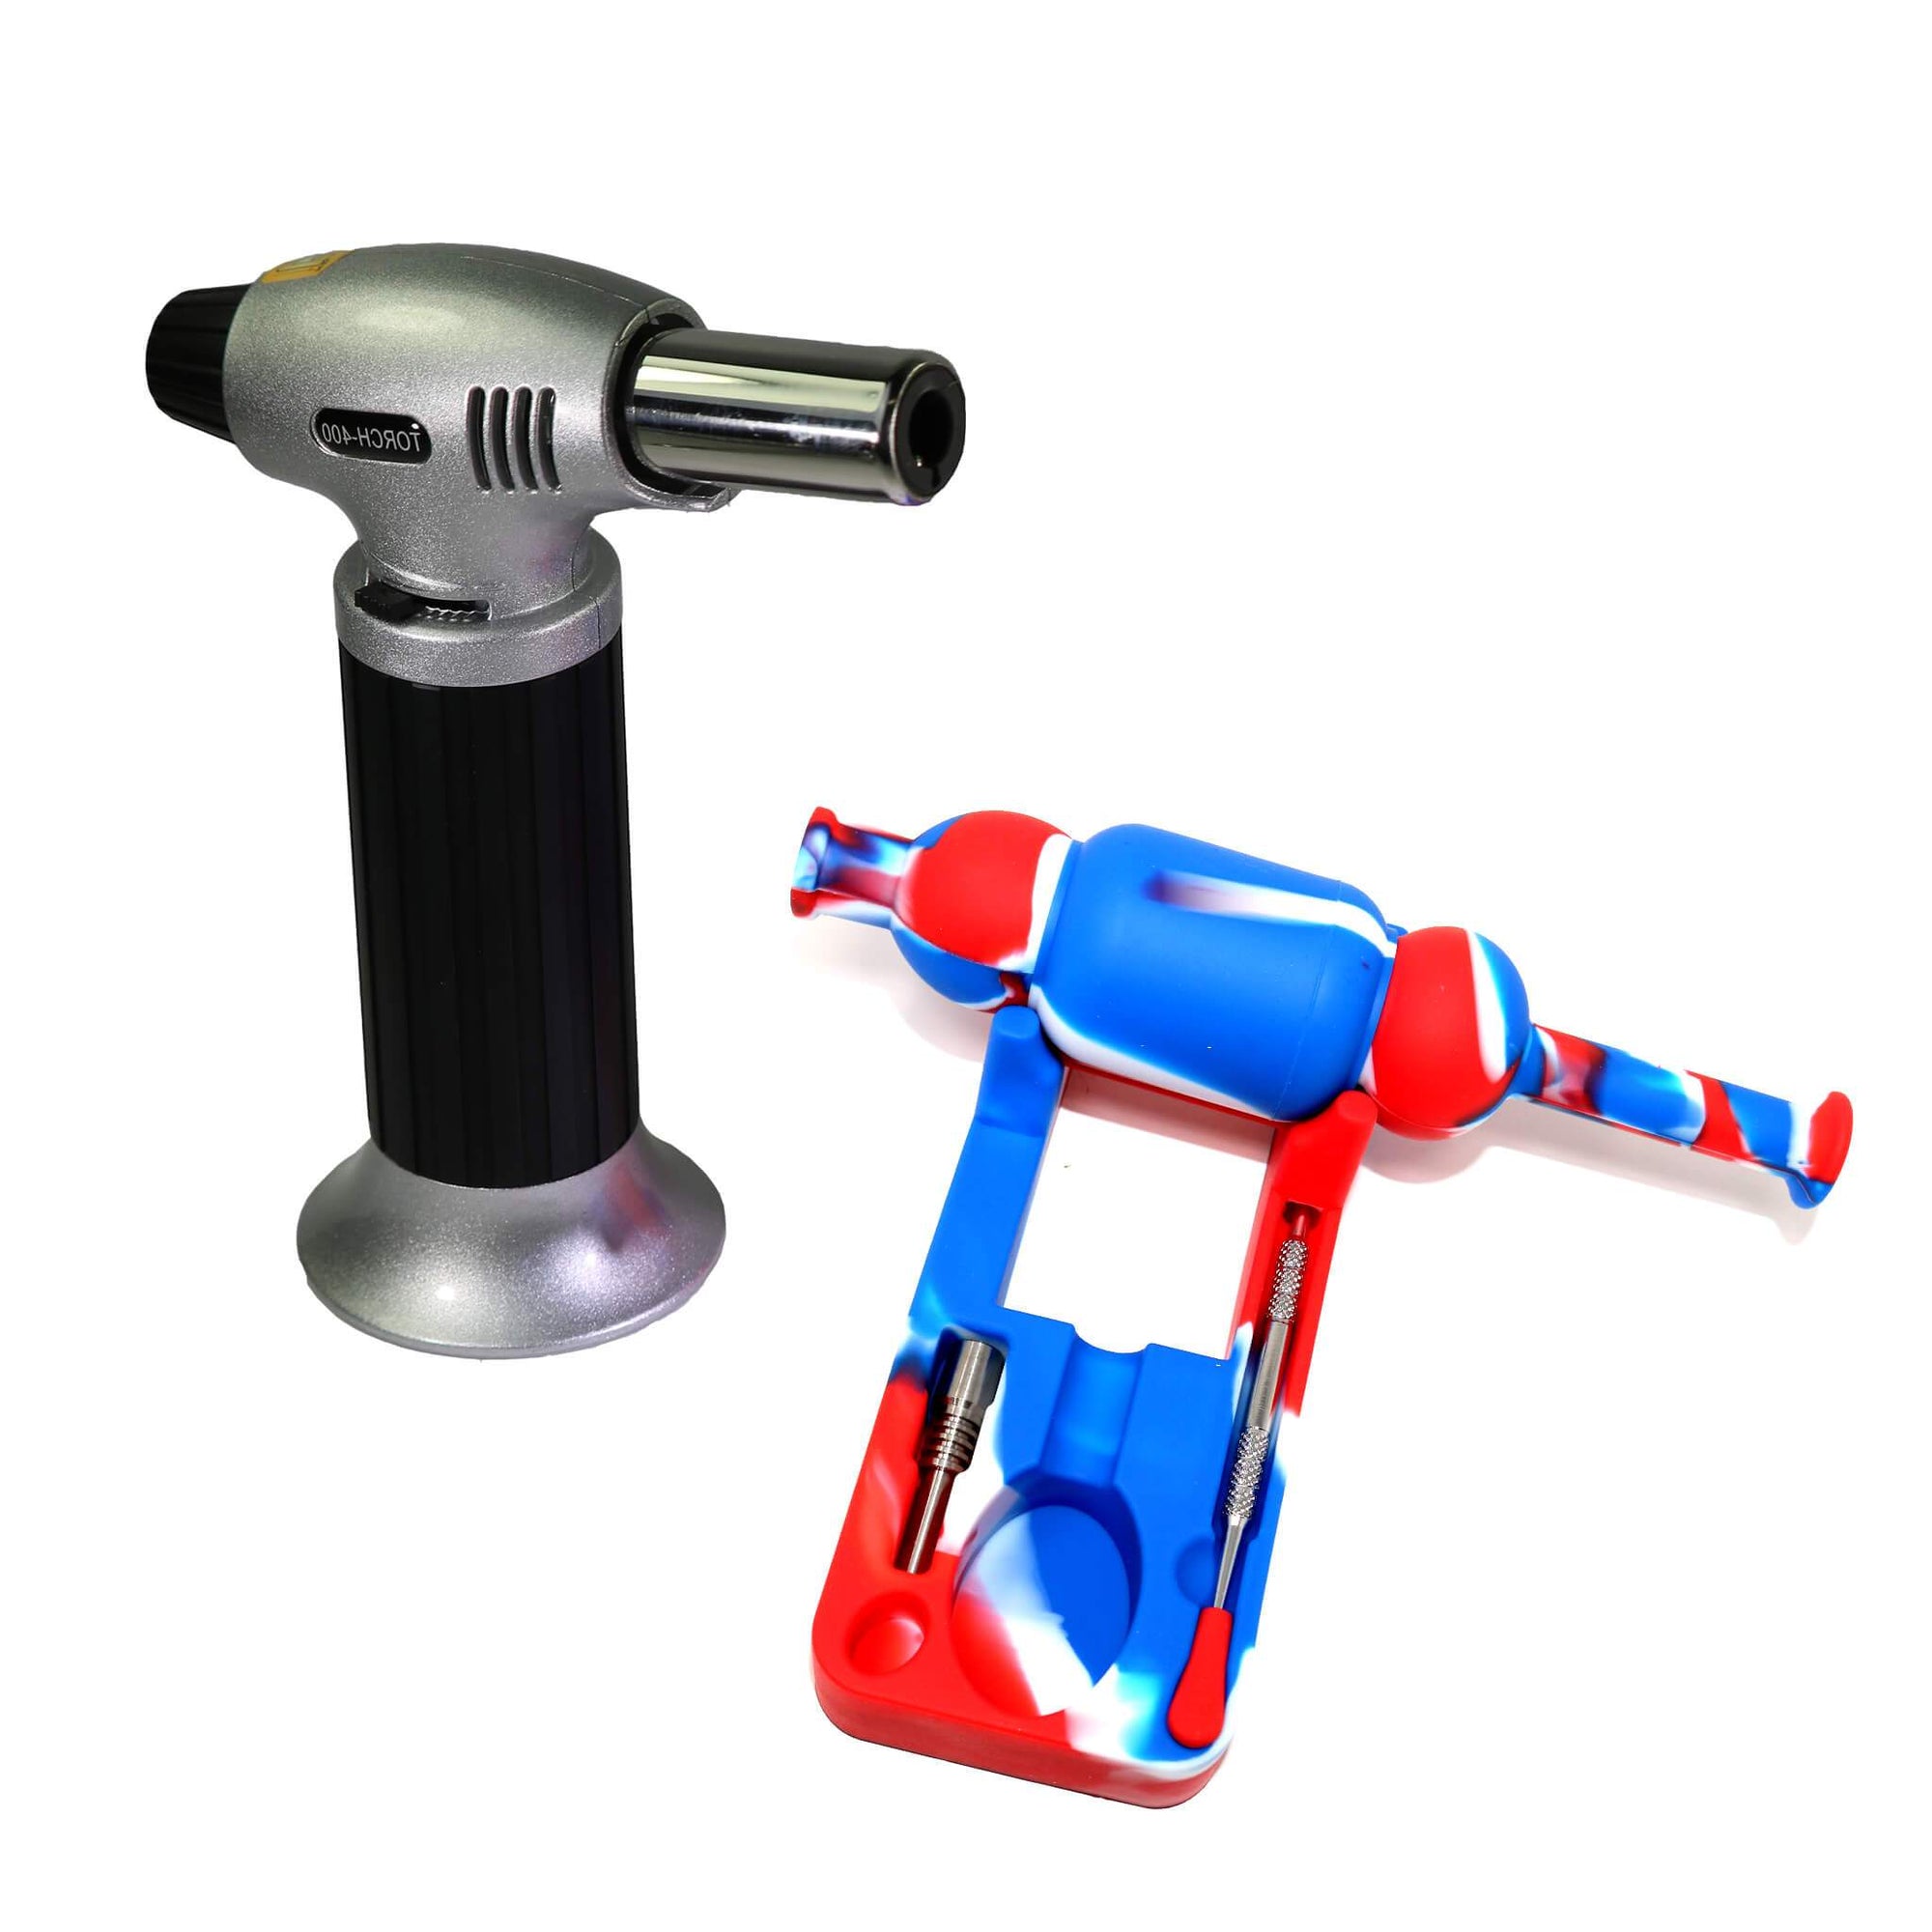 Complete Nectar Collector Dabbing Bundle | Red & White & Blue View | Dabbing Warehouse